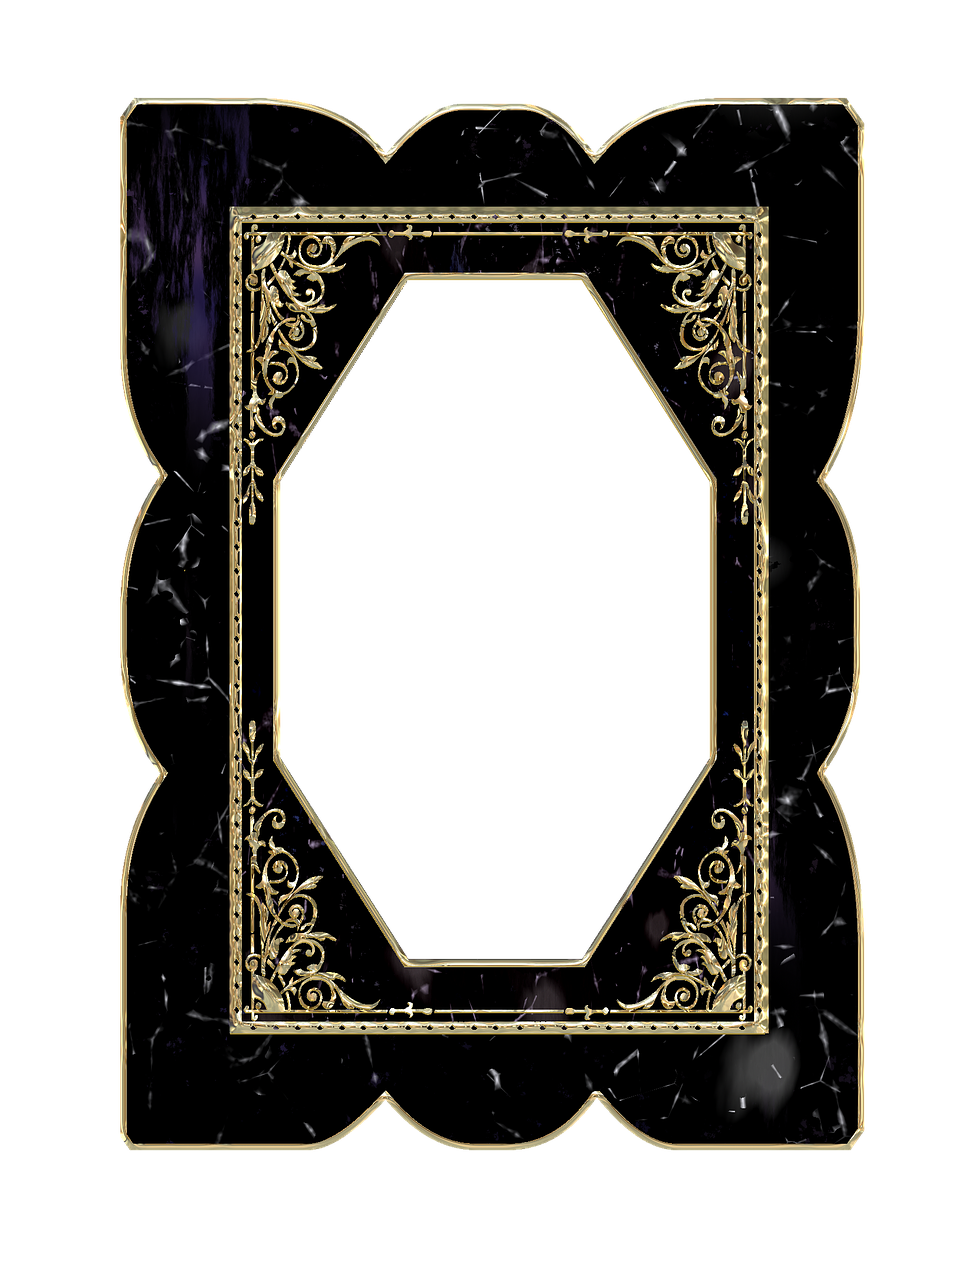 a black and gold frame on a black background, an album cover, tumblr, art deco, highly detailed marble cloth, gothic background, fractal frame, the front of a trading card